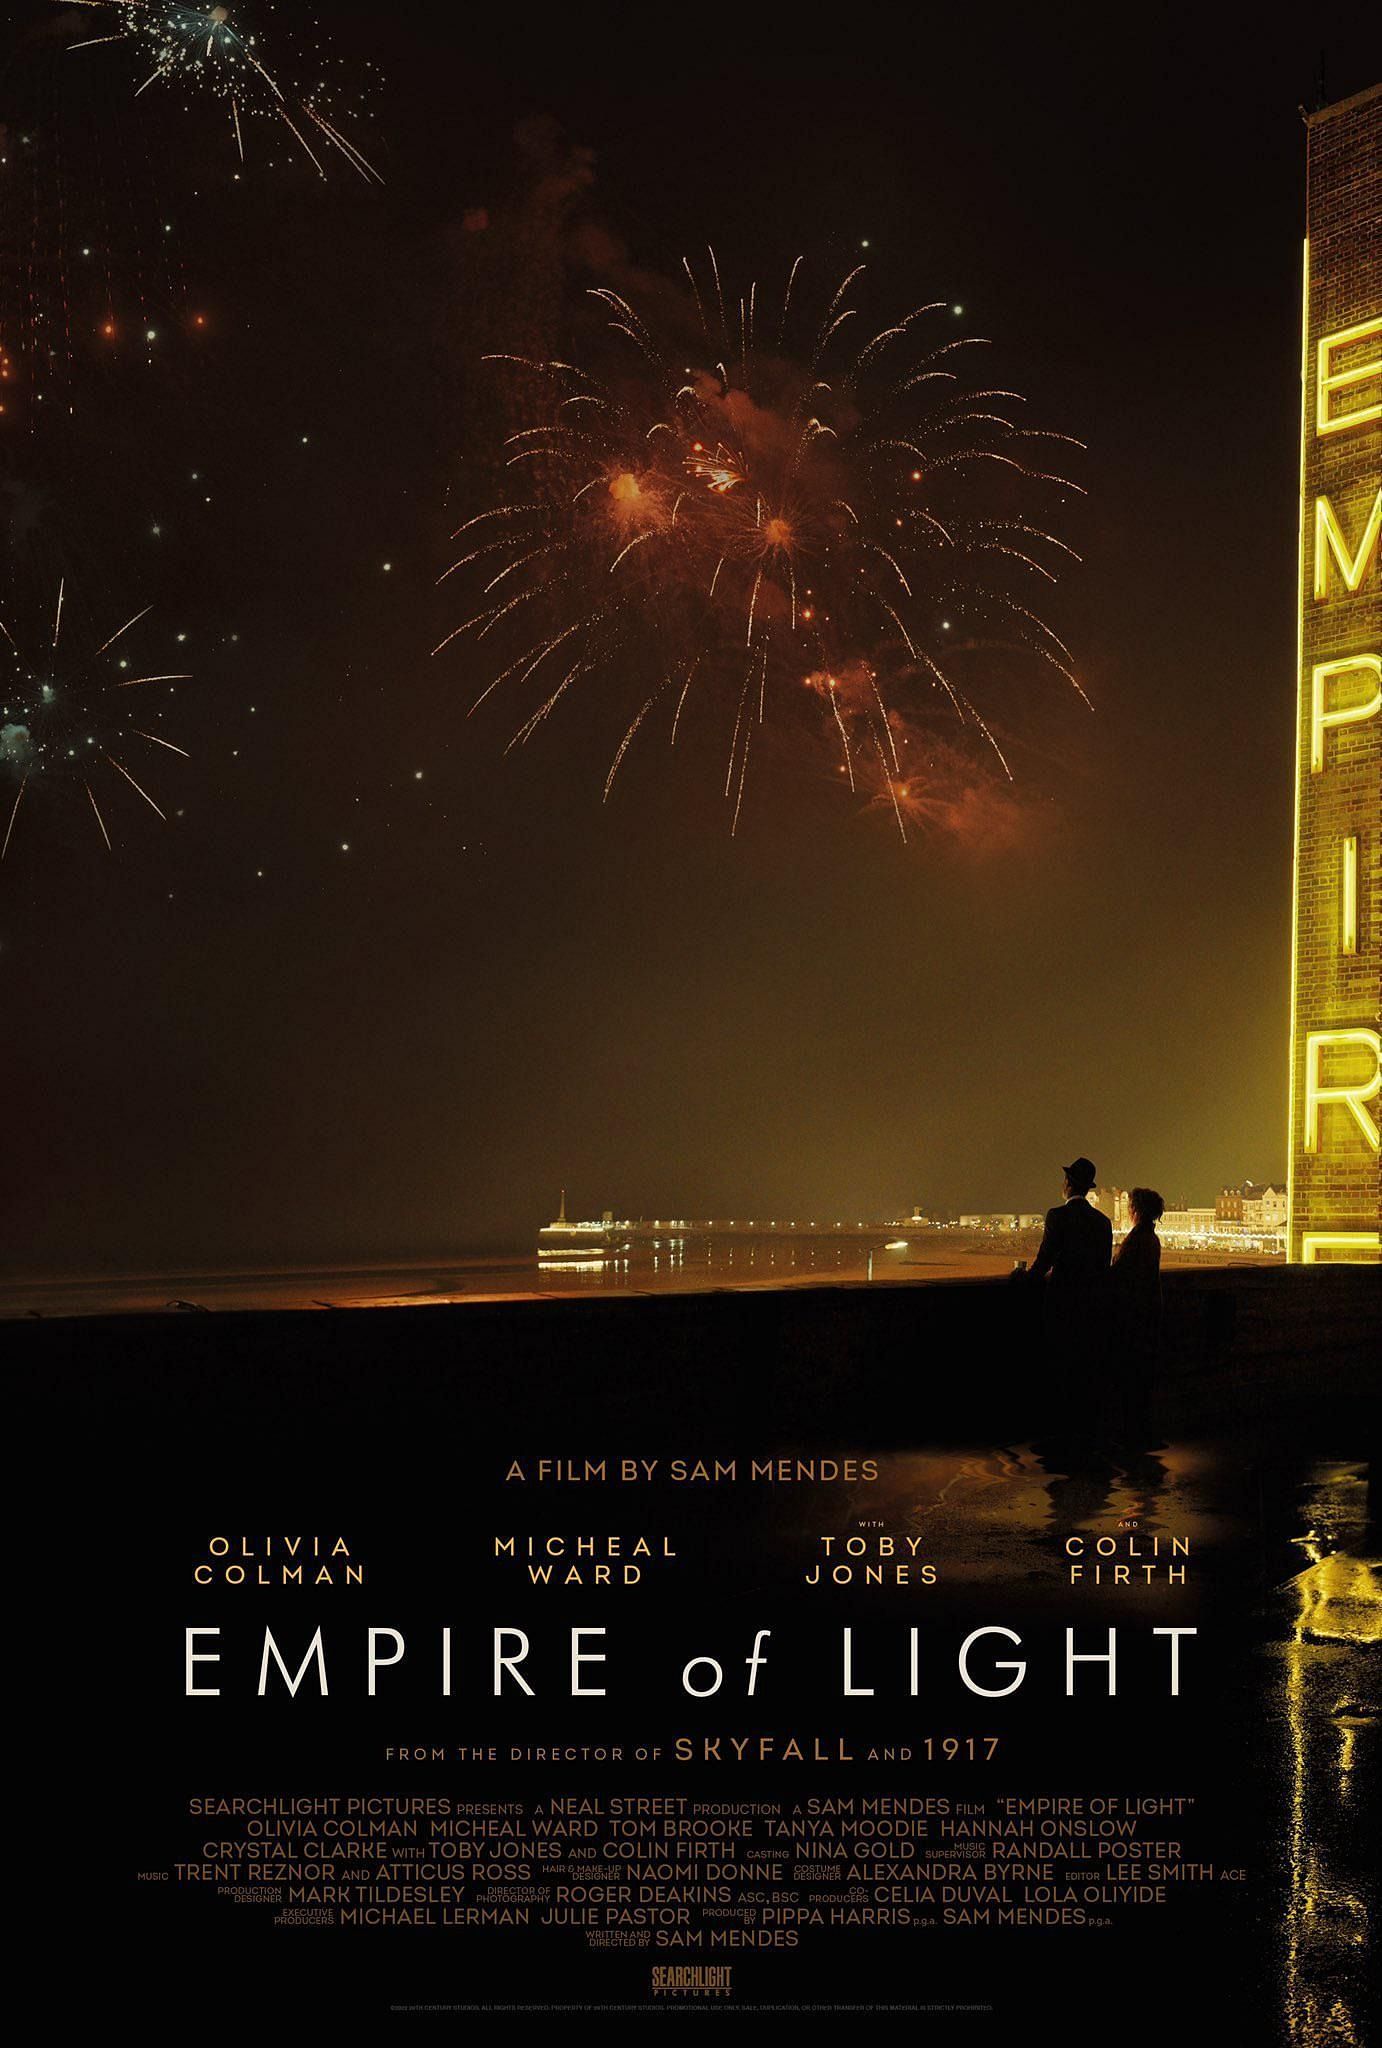 Empire of Light (Image via Searchlight Pictures)